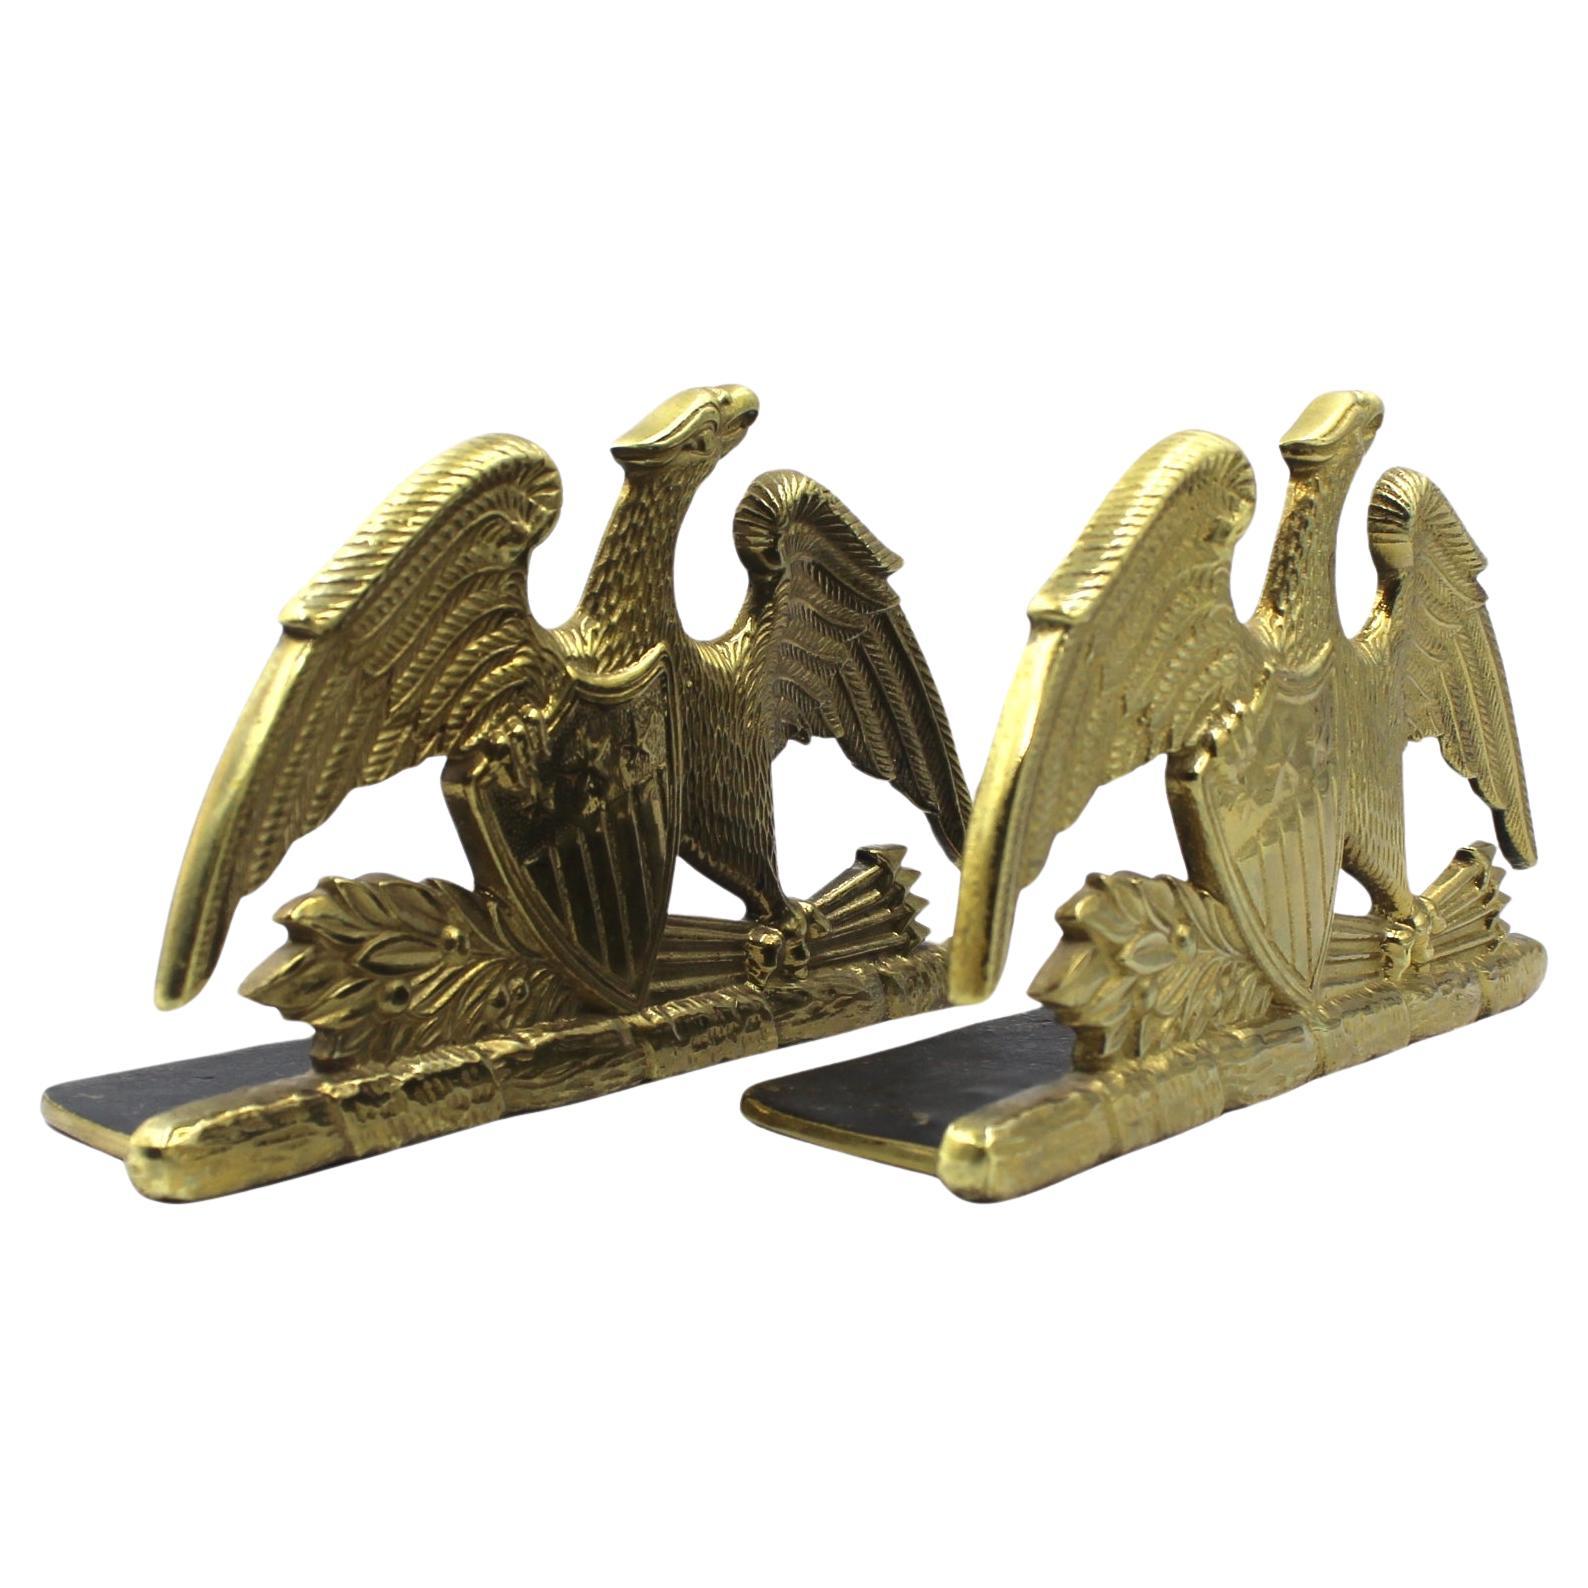 Offered is a beautiful pair of spread-wing eagle bookends by Virginia Metalcrafters, stamped 1952. The eagle is shown with its wings fully spread and a laurel branch and bundle of arrows clutched in its left talon. The eagle clutches a Union shield